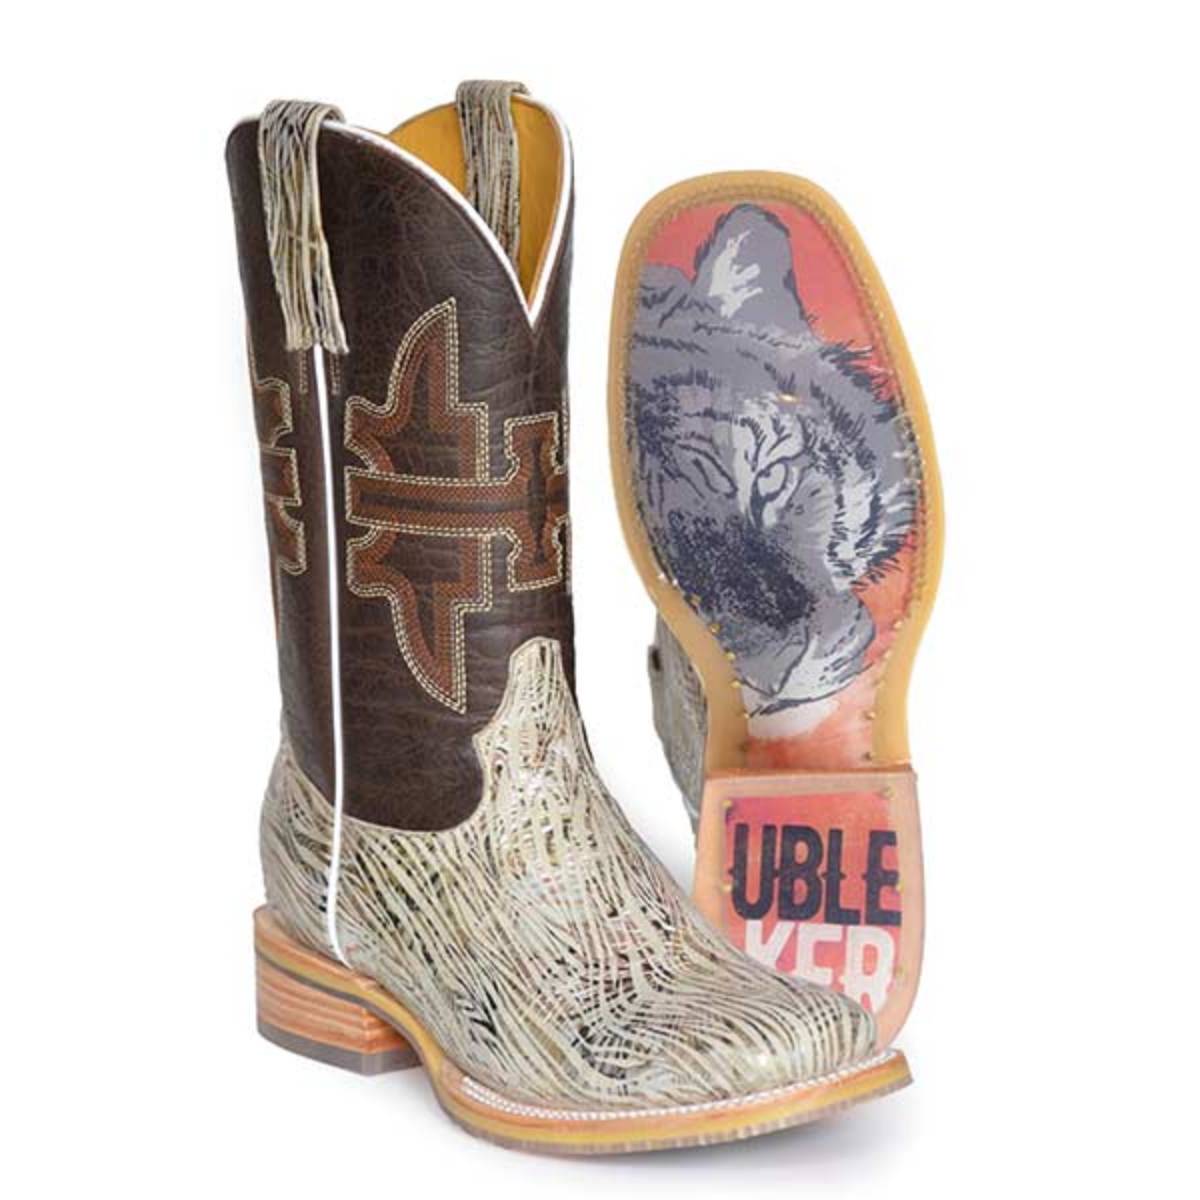 Women's Tin Haul Golden Tiger Trouble Maker Sole Boots Handcrafted Brown - yeehawcowboy